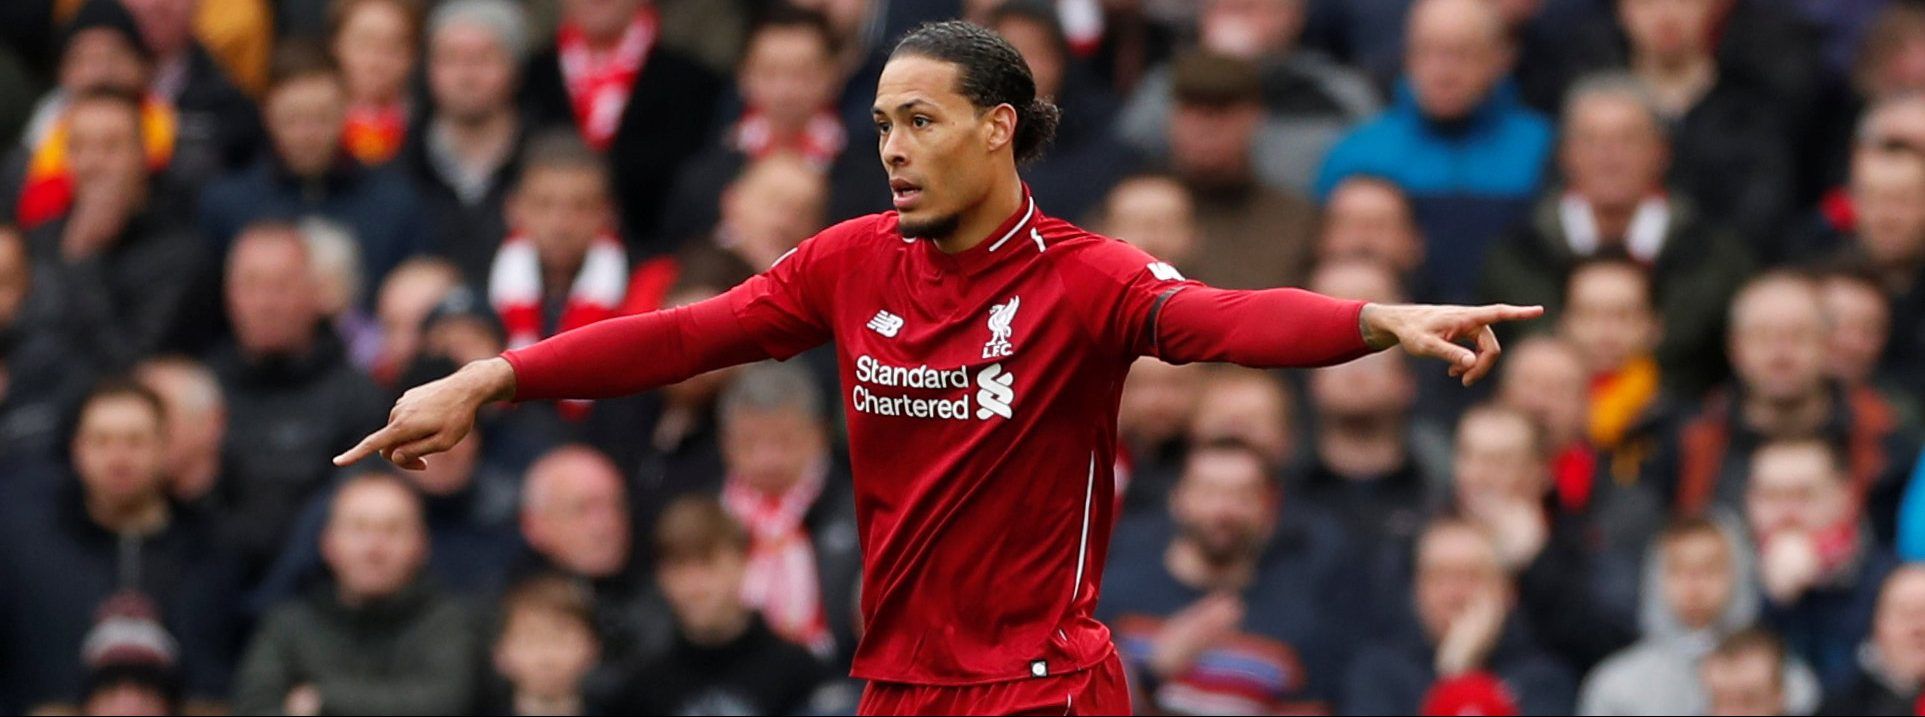 Soccer Football - Premier League - Liverpool v Chelsea - Anfield, Liverpool, Britain - April 14, 2019  Liverpool's Virgil van Dijk      Action Images via Reuters/Lee Smith  EDITORIAL USE ONLY. No use with unauthorized audio, video, data, fixture lists, club/league logos or 